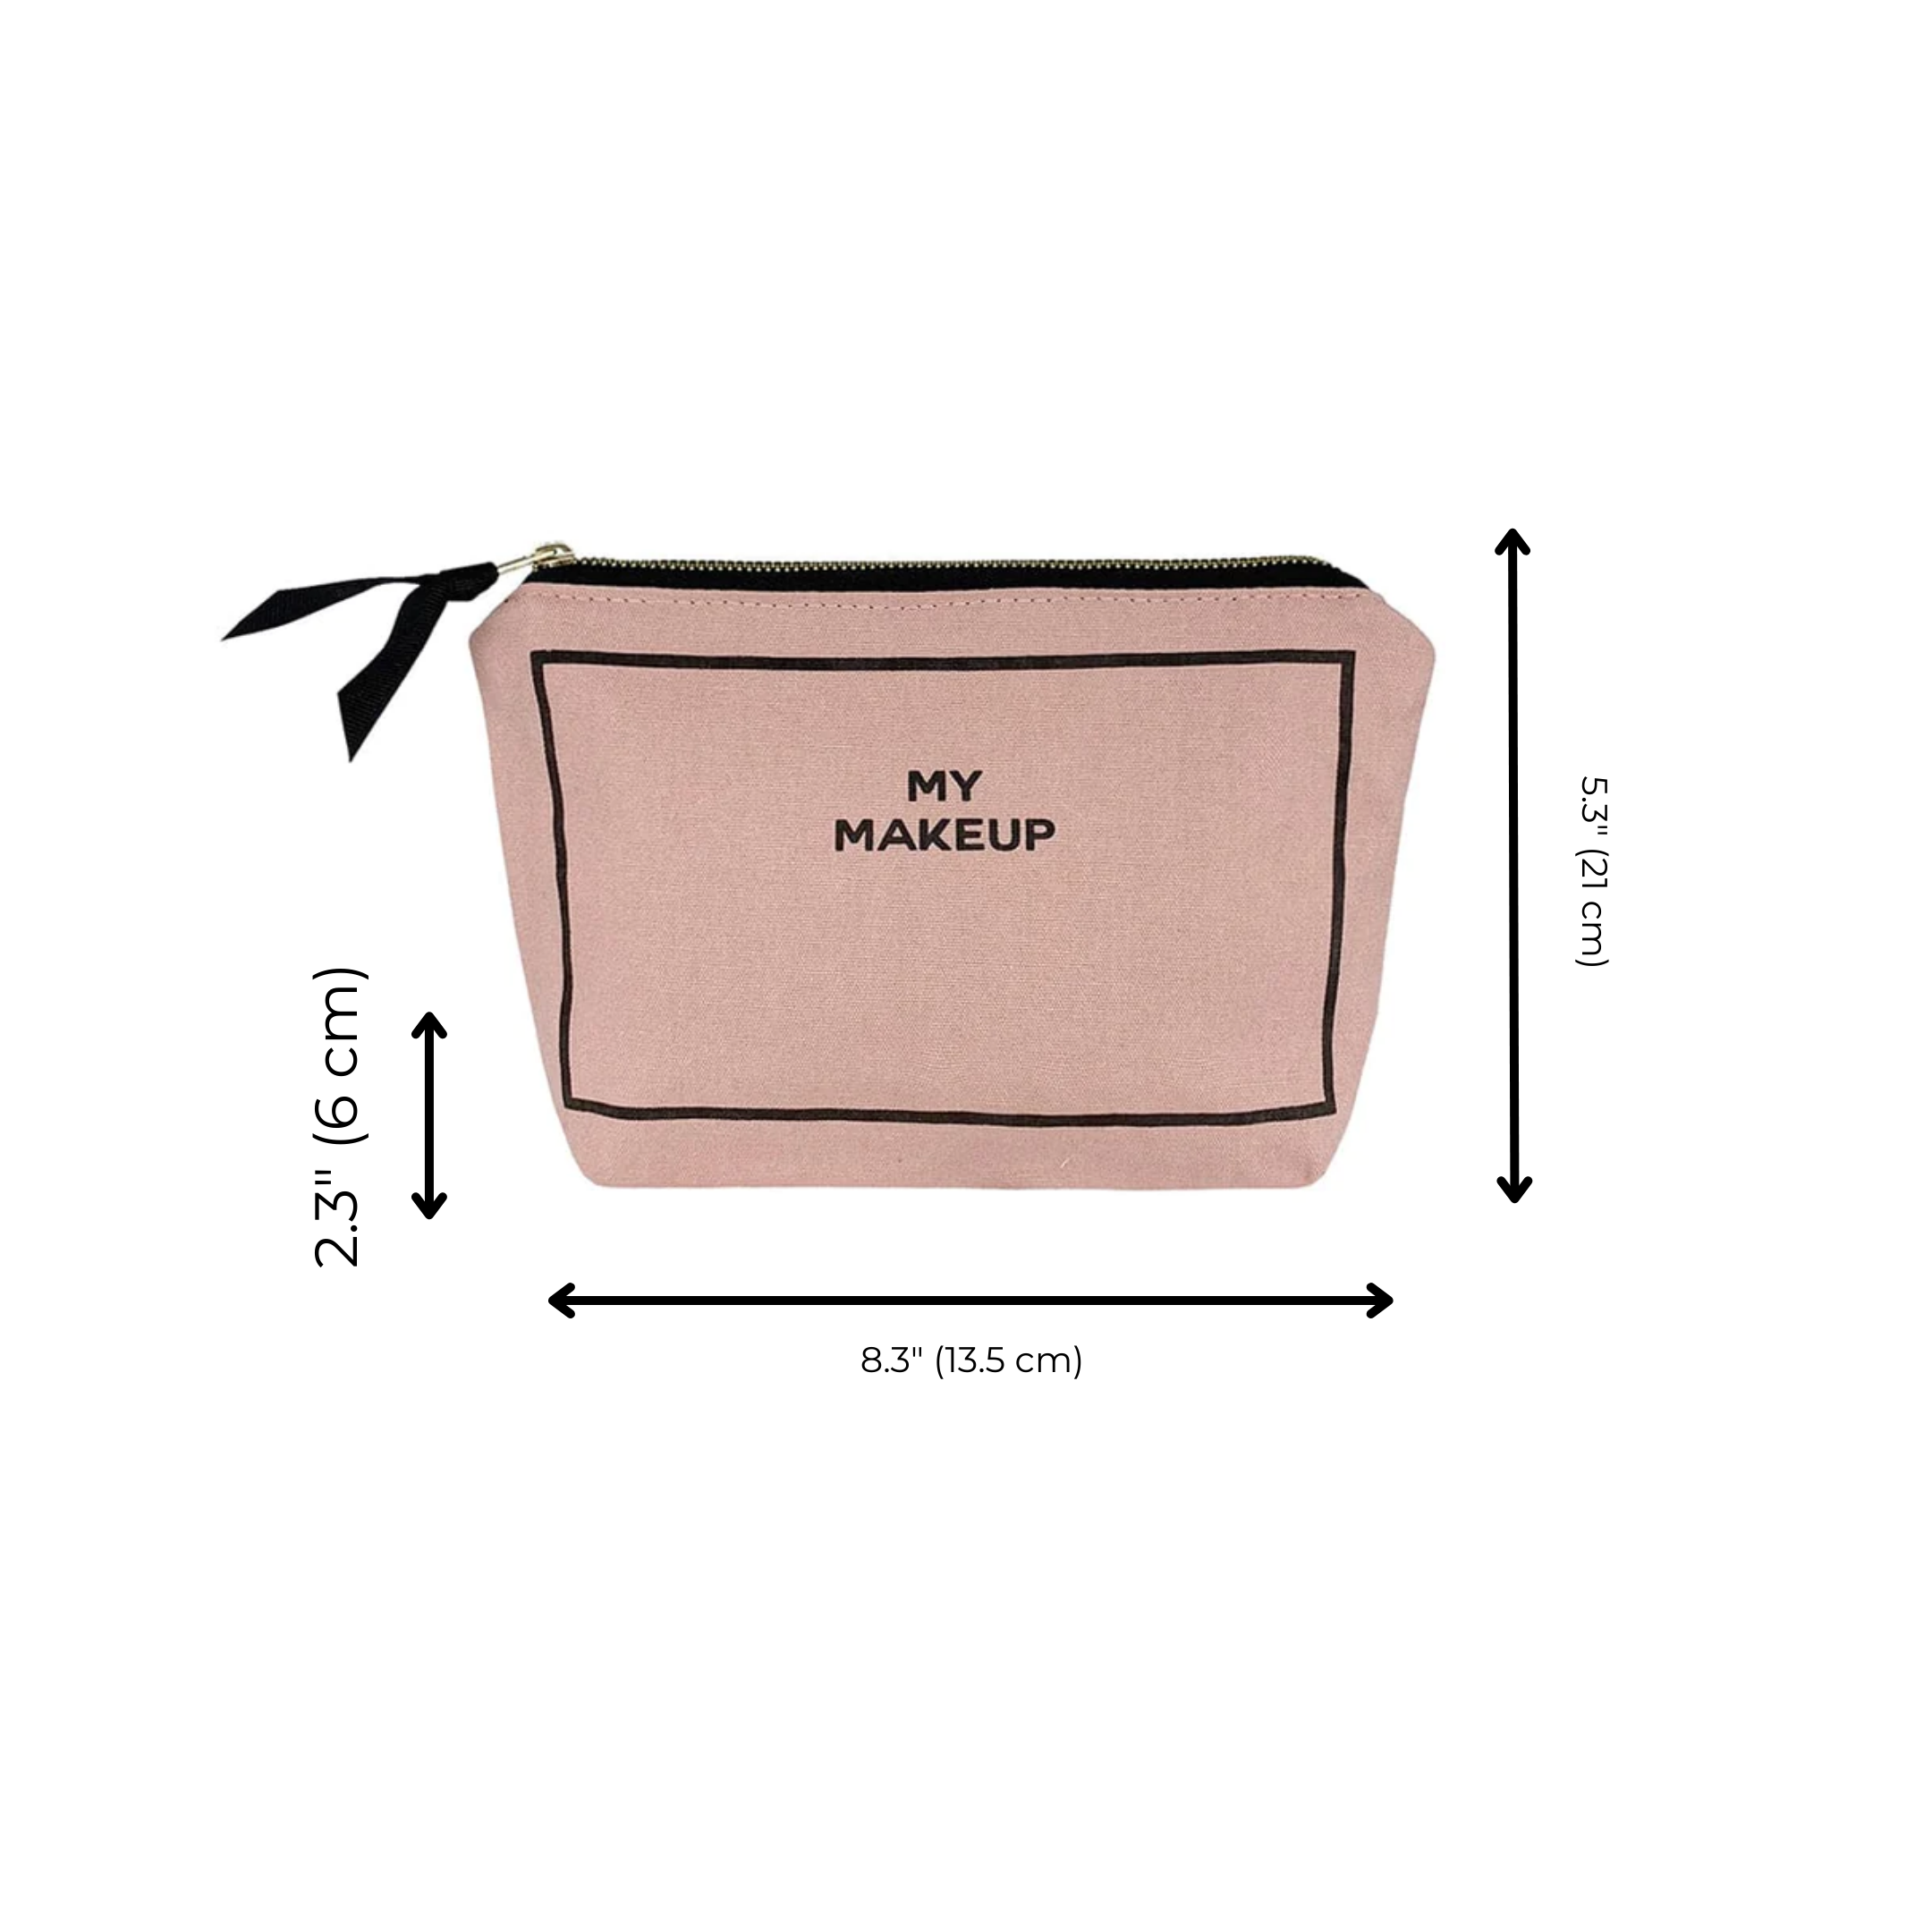 My Makeup Pouch, Coated Lining Pink/Blush | Bag-all